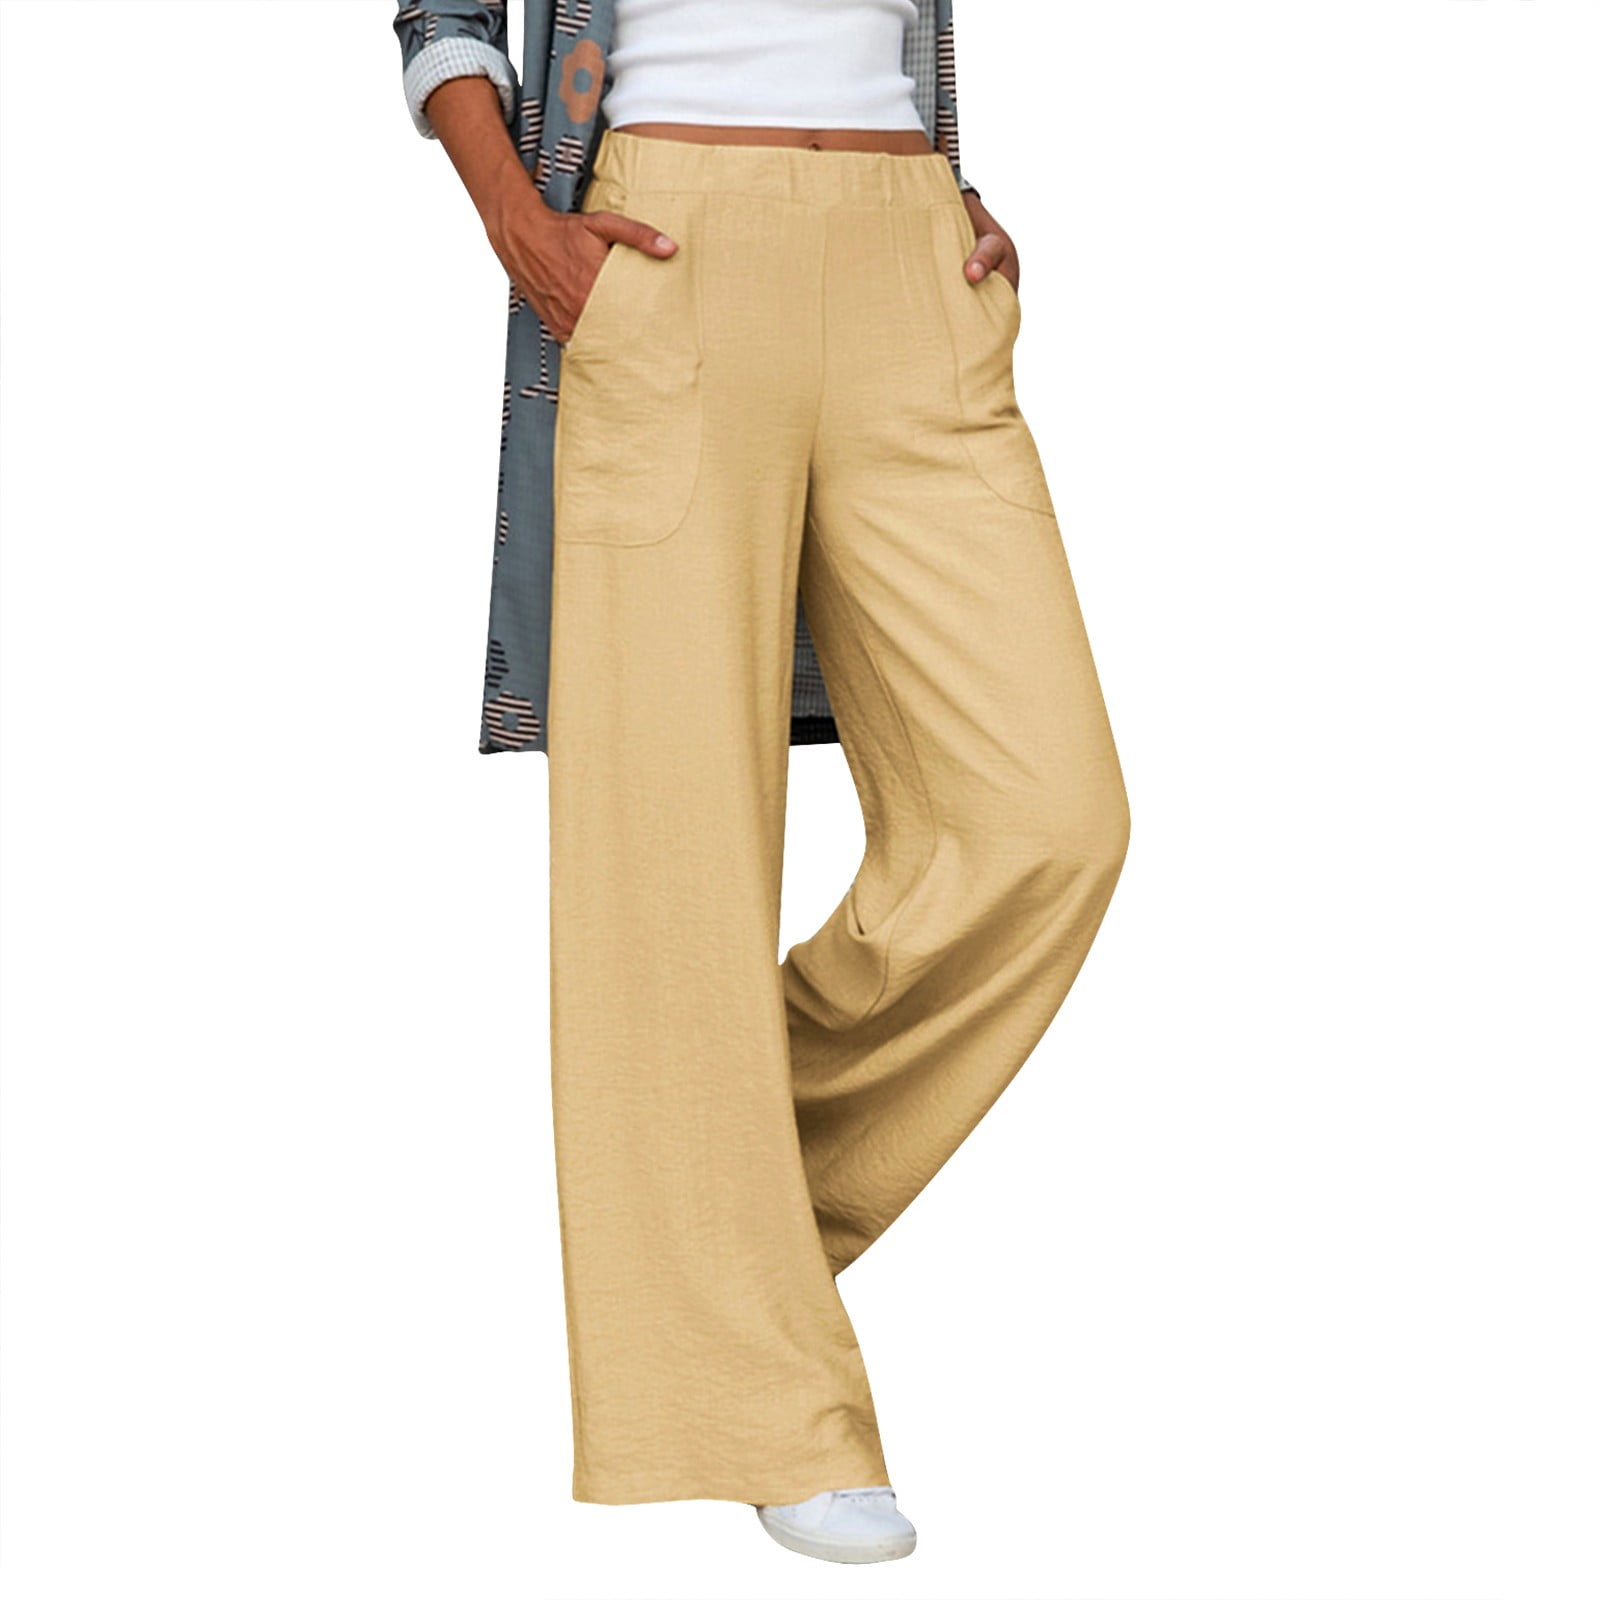 Tsful Wide Leg Pants for Women Trousers High Waisted Dress Pants Business  Casual Summer Capris Stretch Pull On Work Slacks